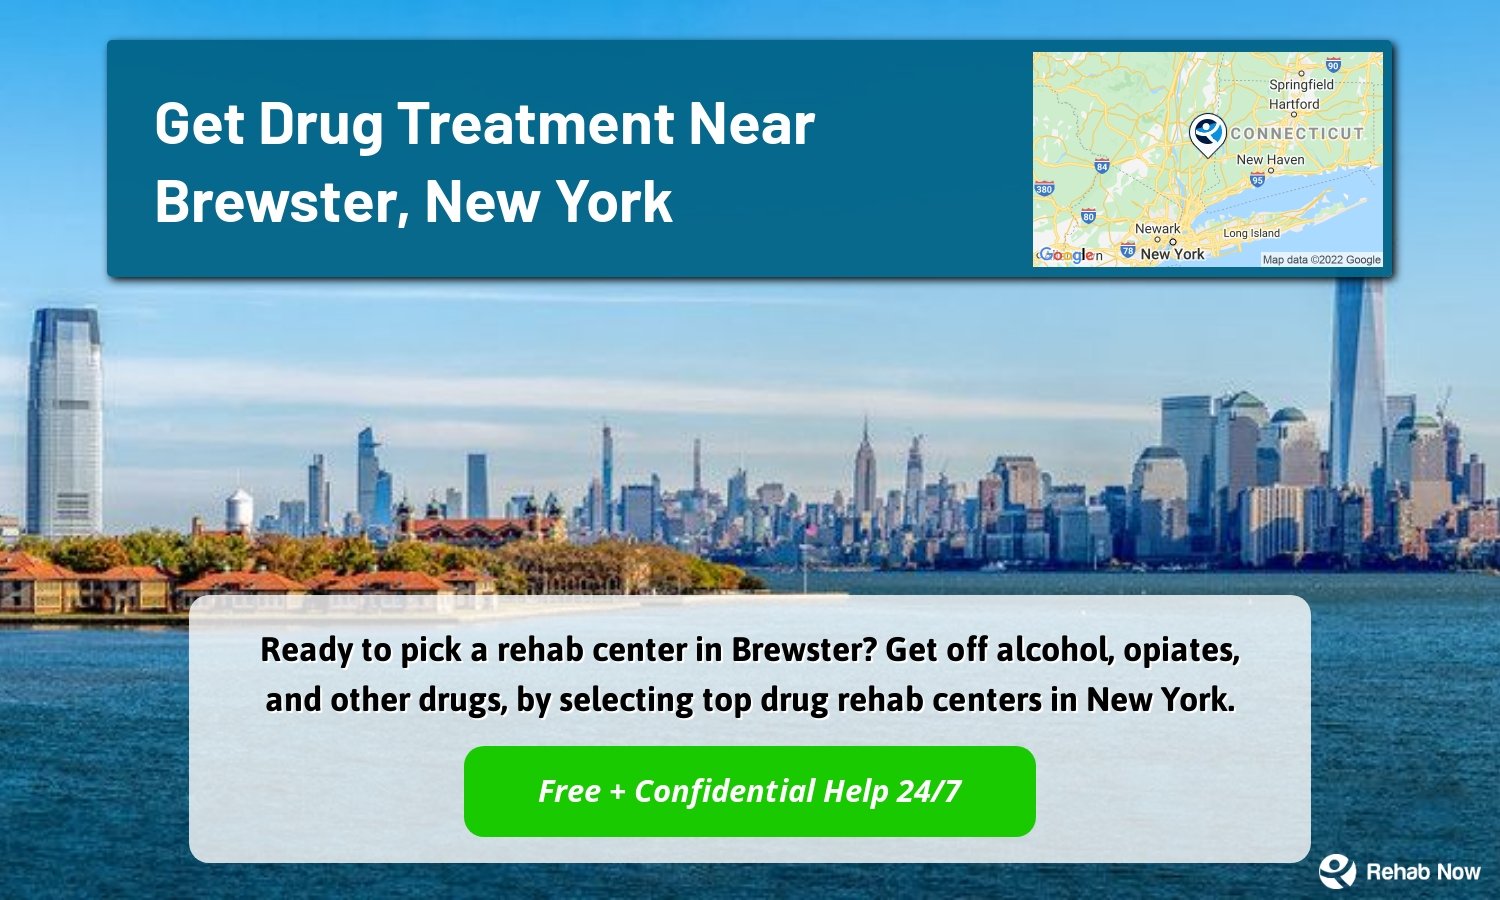 Ready to pick a rehab center in Brewster? Get off alcohol, opiates, and other drugs, by selecting top drug rehab centers in New York.